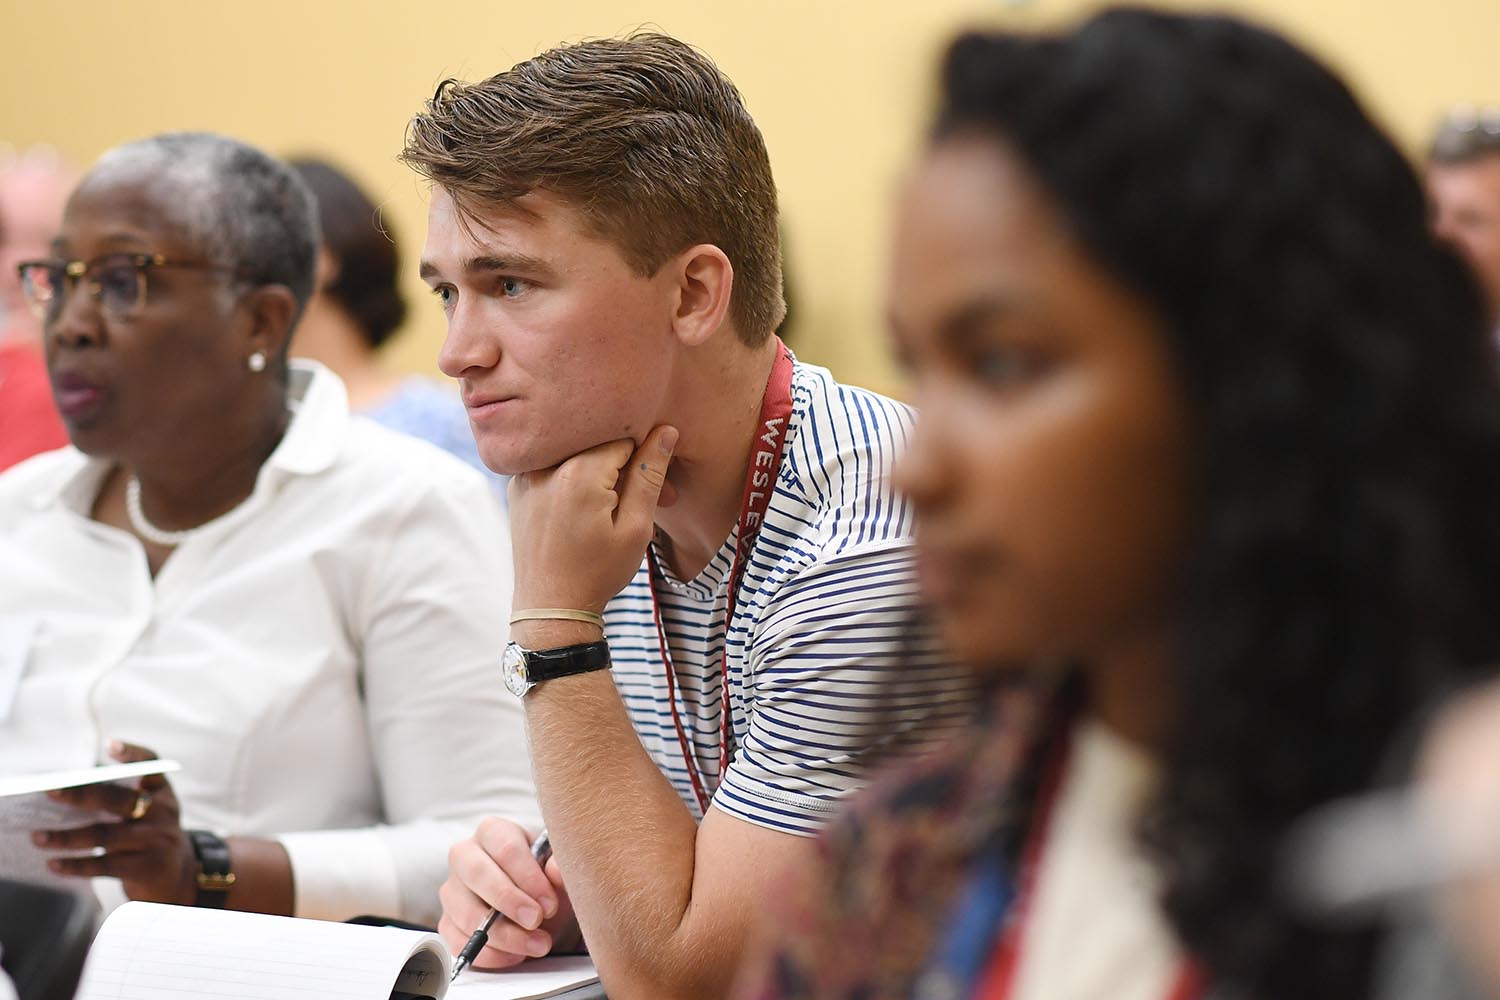 More than 40 writers, including two alumni and one staff member, attended the 52nd Annual Wesleyan Writers Conference June 13-17 on campus. The conference welcomes experienced writers, new writers, and everyone interested in the writer’s craft.